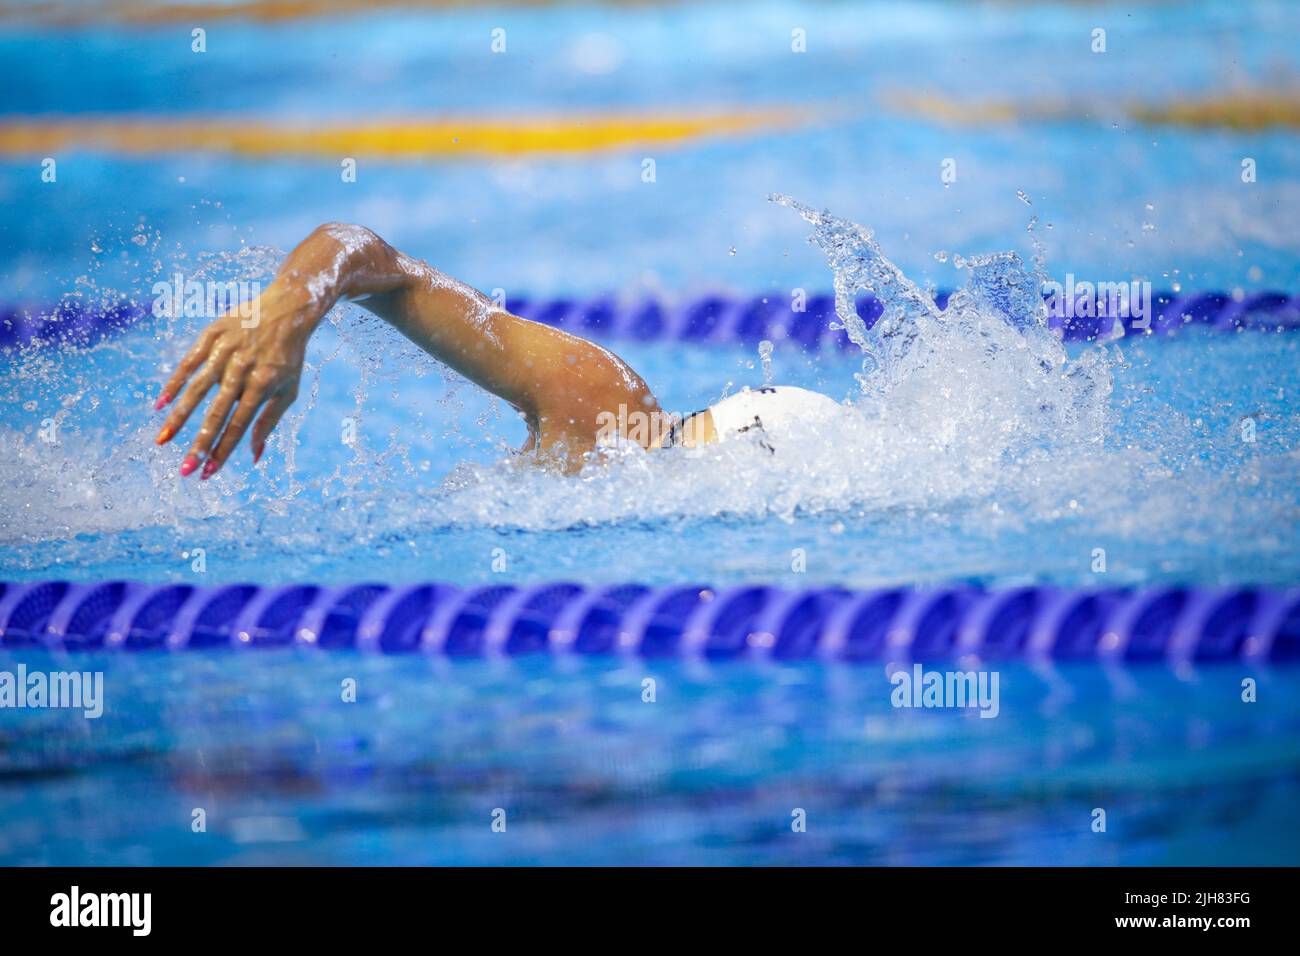 Details with a professional female athlete swimming in an olympic swimming pool. Stock Photo